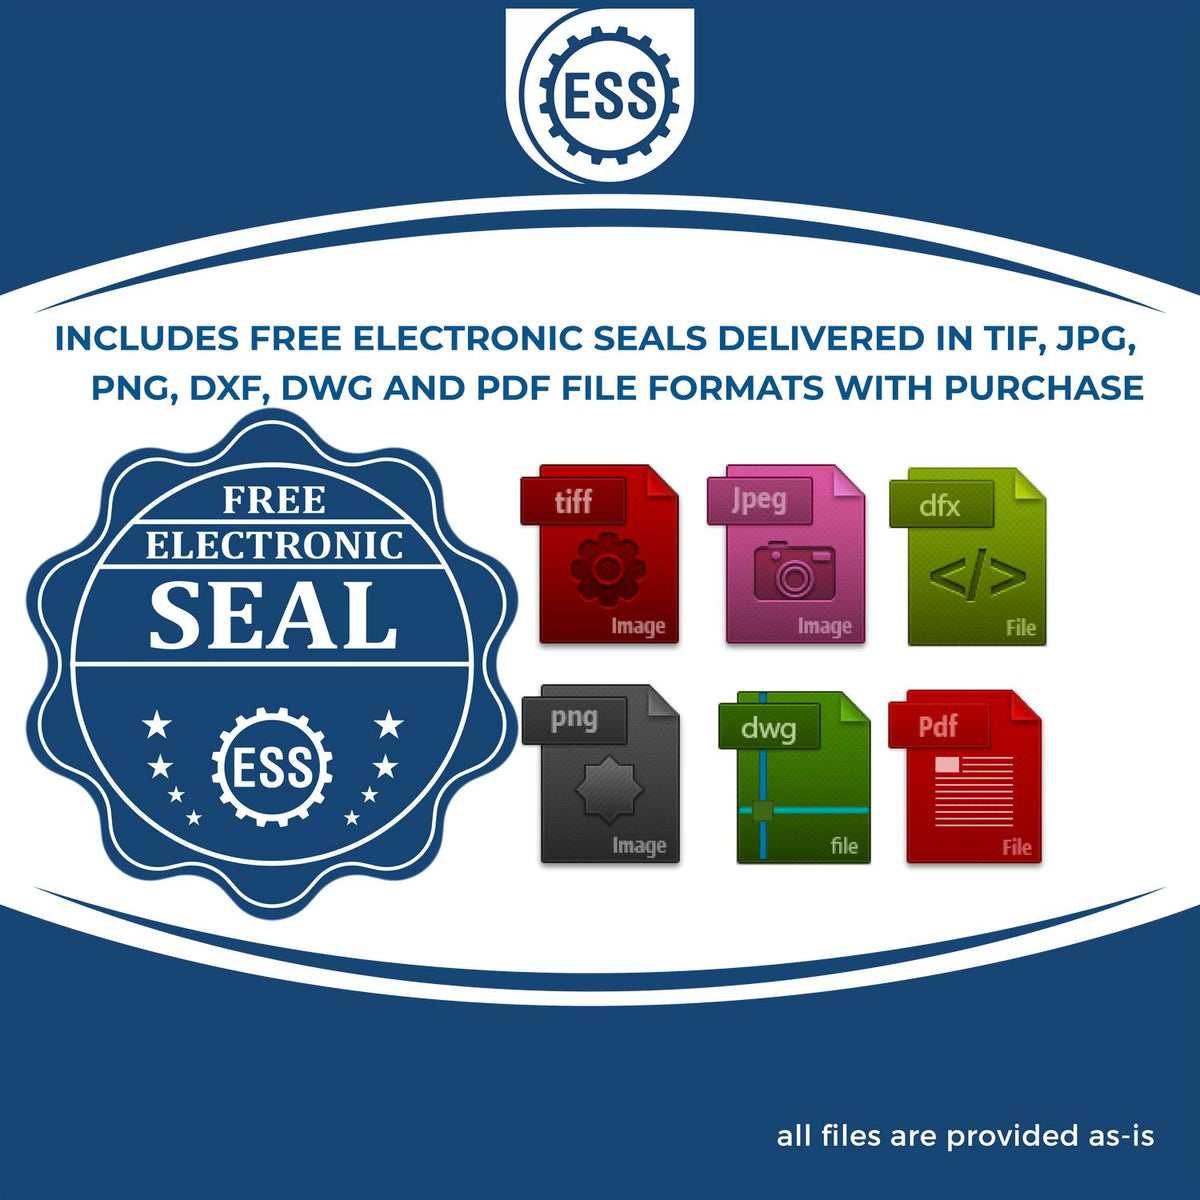 An infographic for the free electronic seal for the Slim Pre-Inked Nevada Landscape Architect Seal Stamp illustrating the different file type icons such as DXF, DWG, TIF, JPG and PNG.